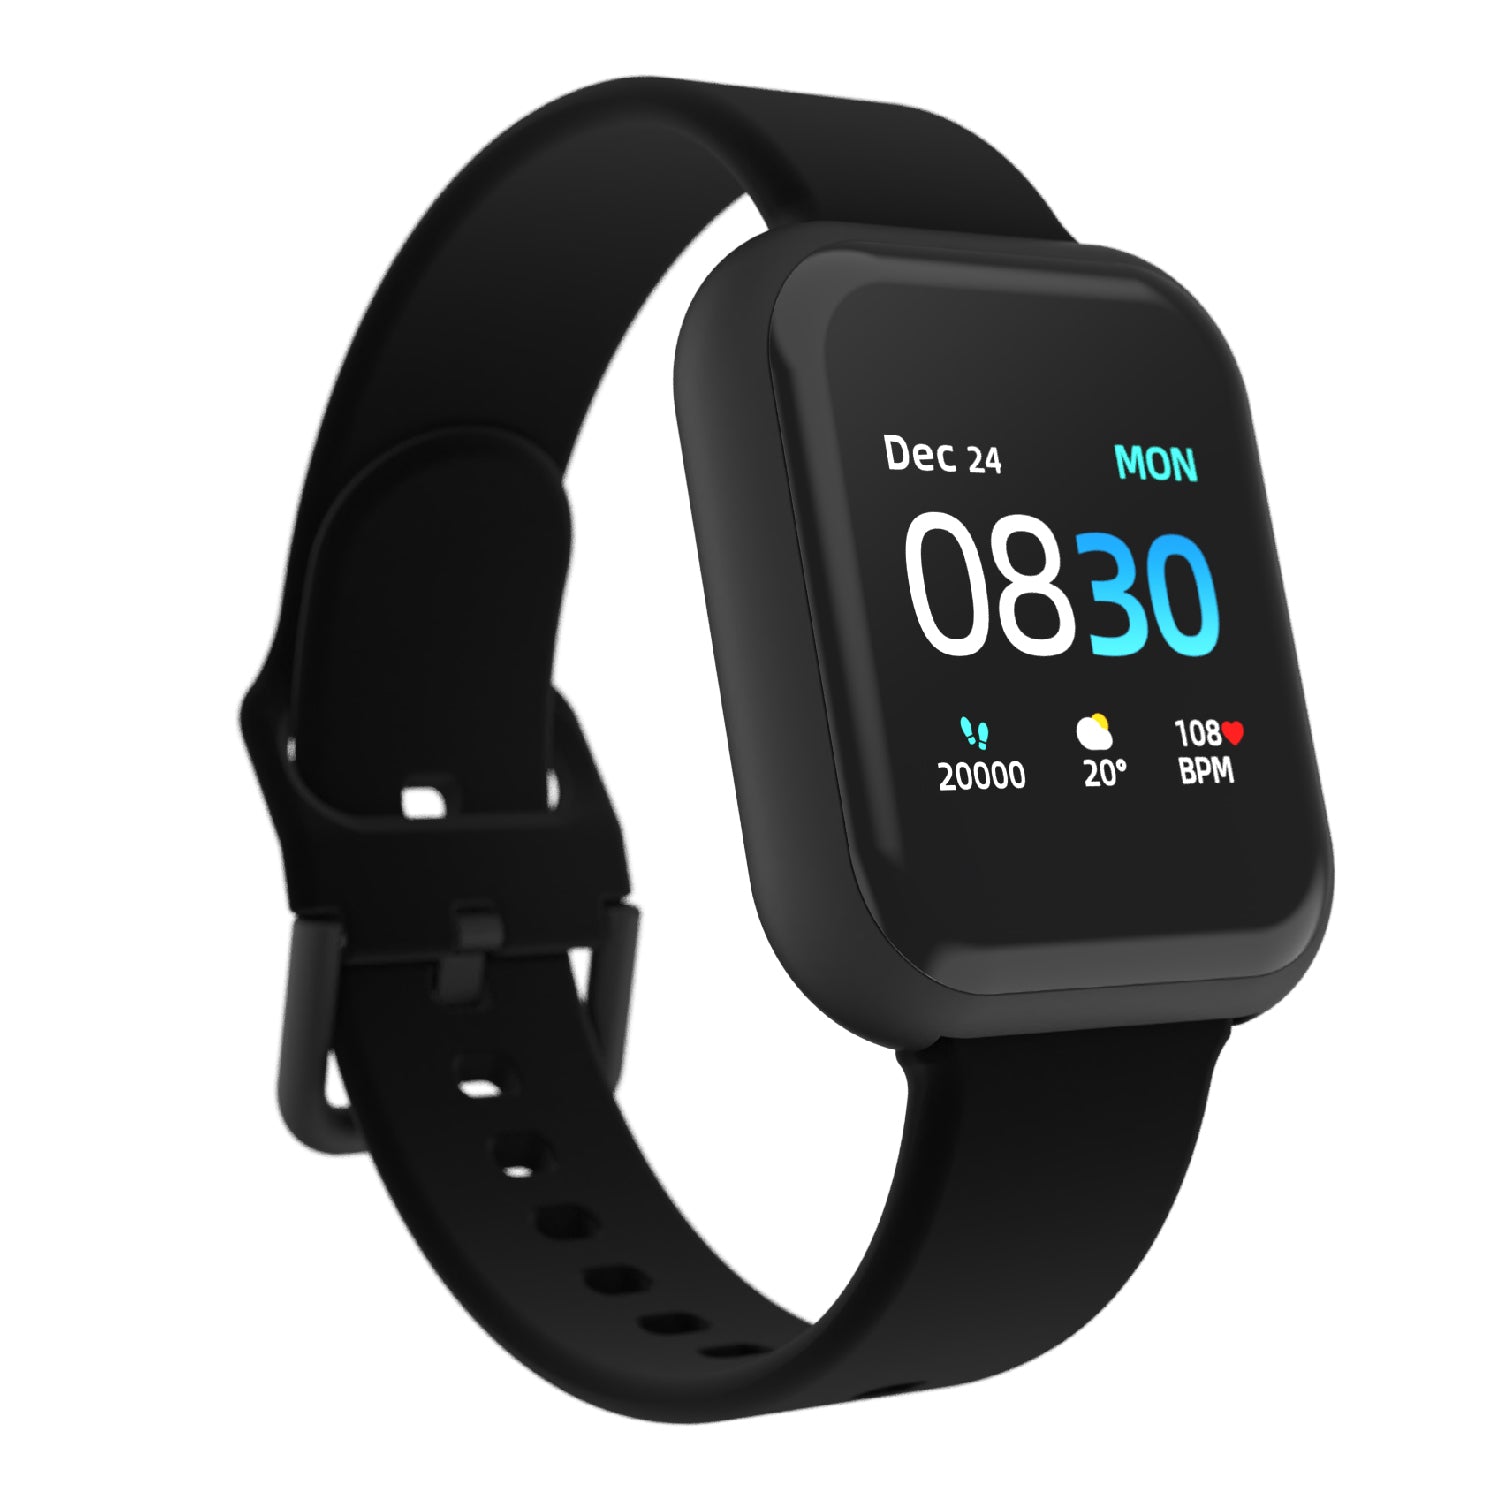 iTouch Air 3 Smartwatch in Black with Black Strap